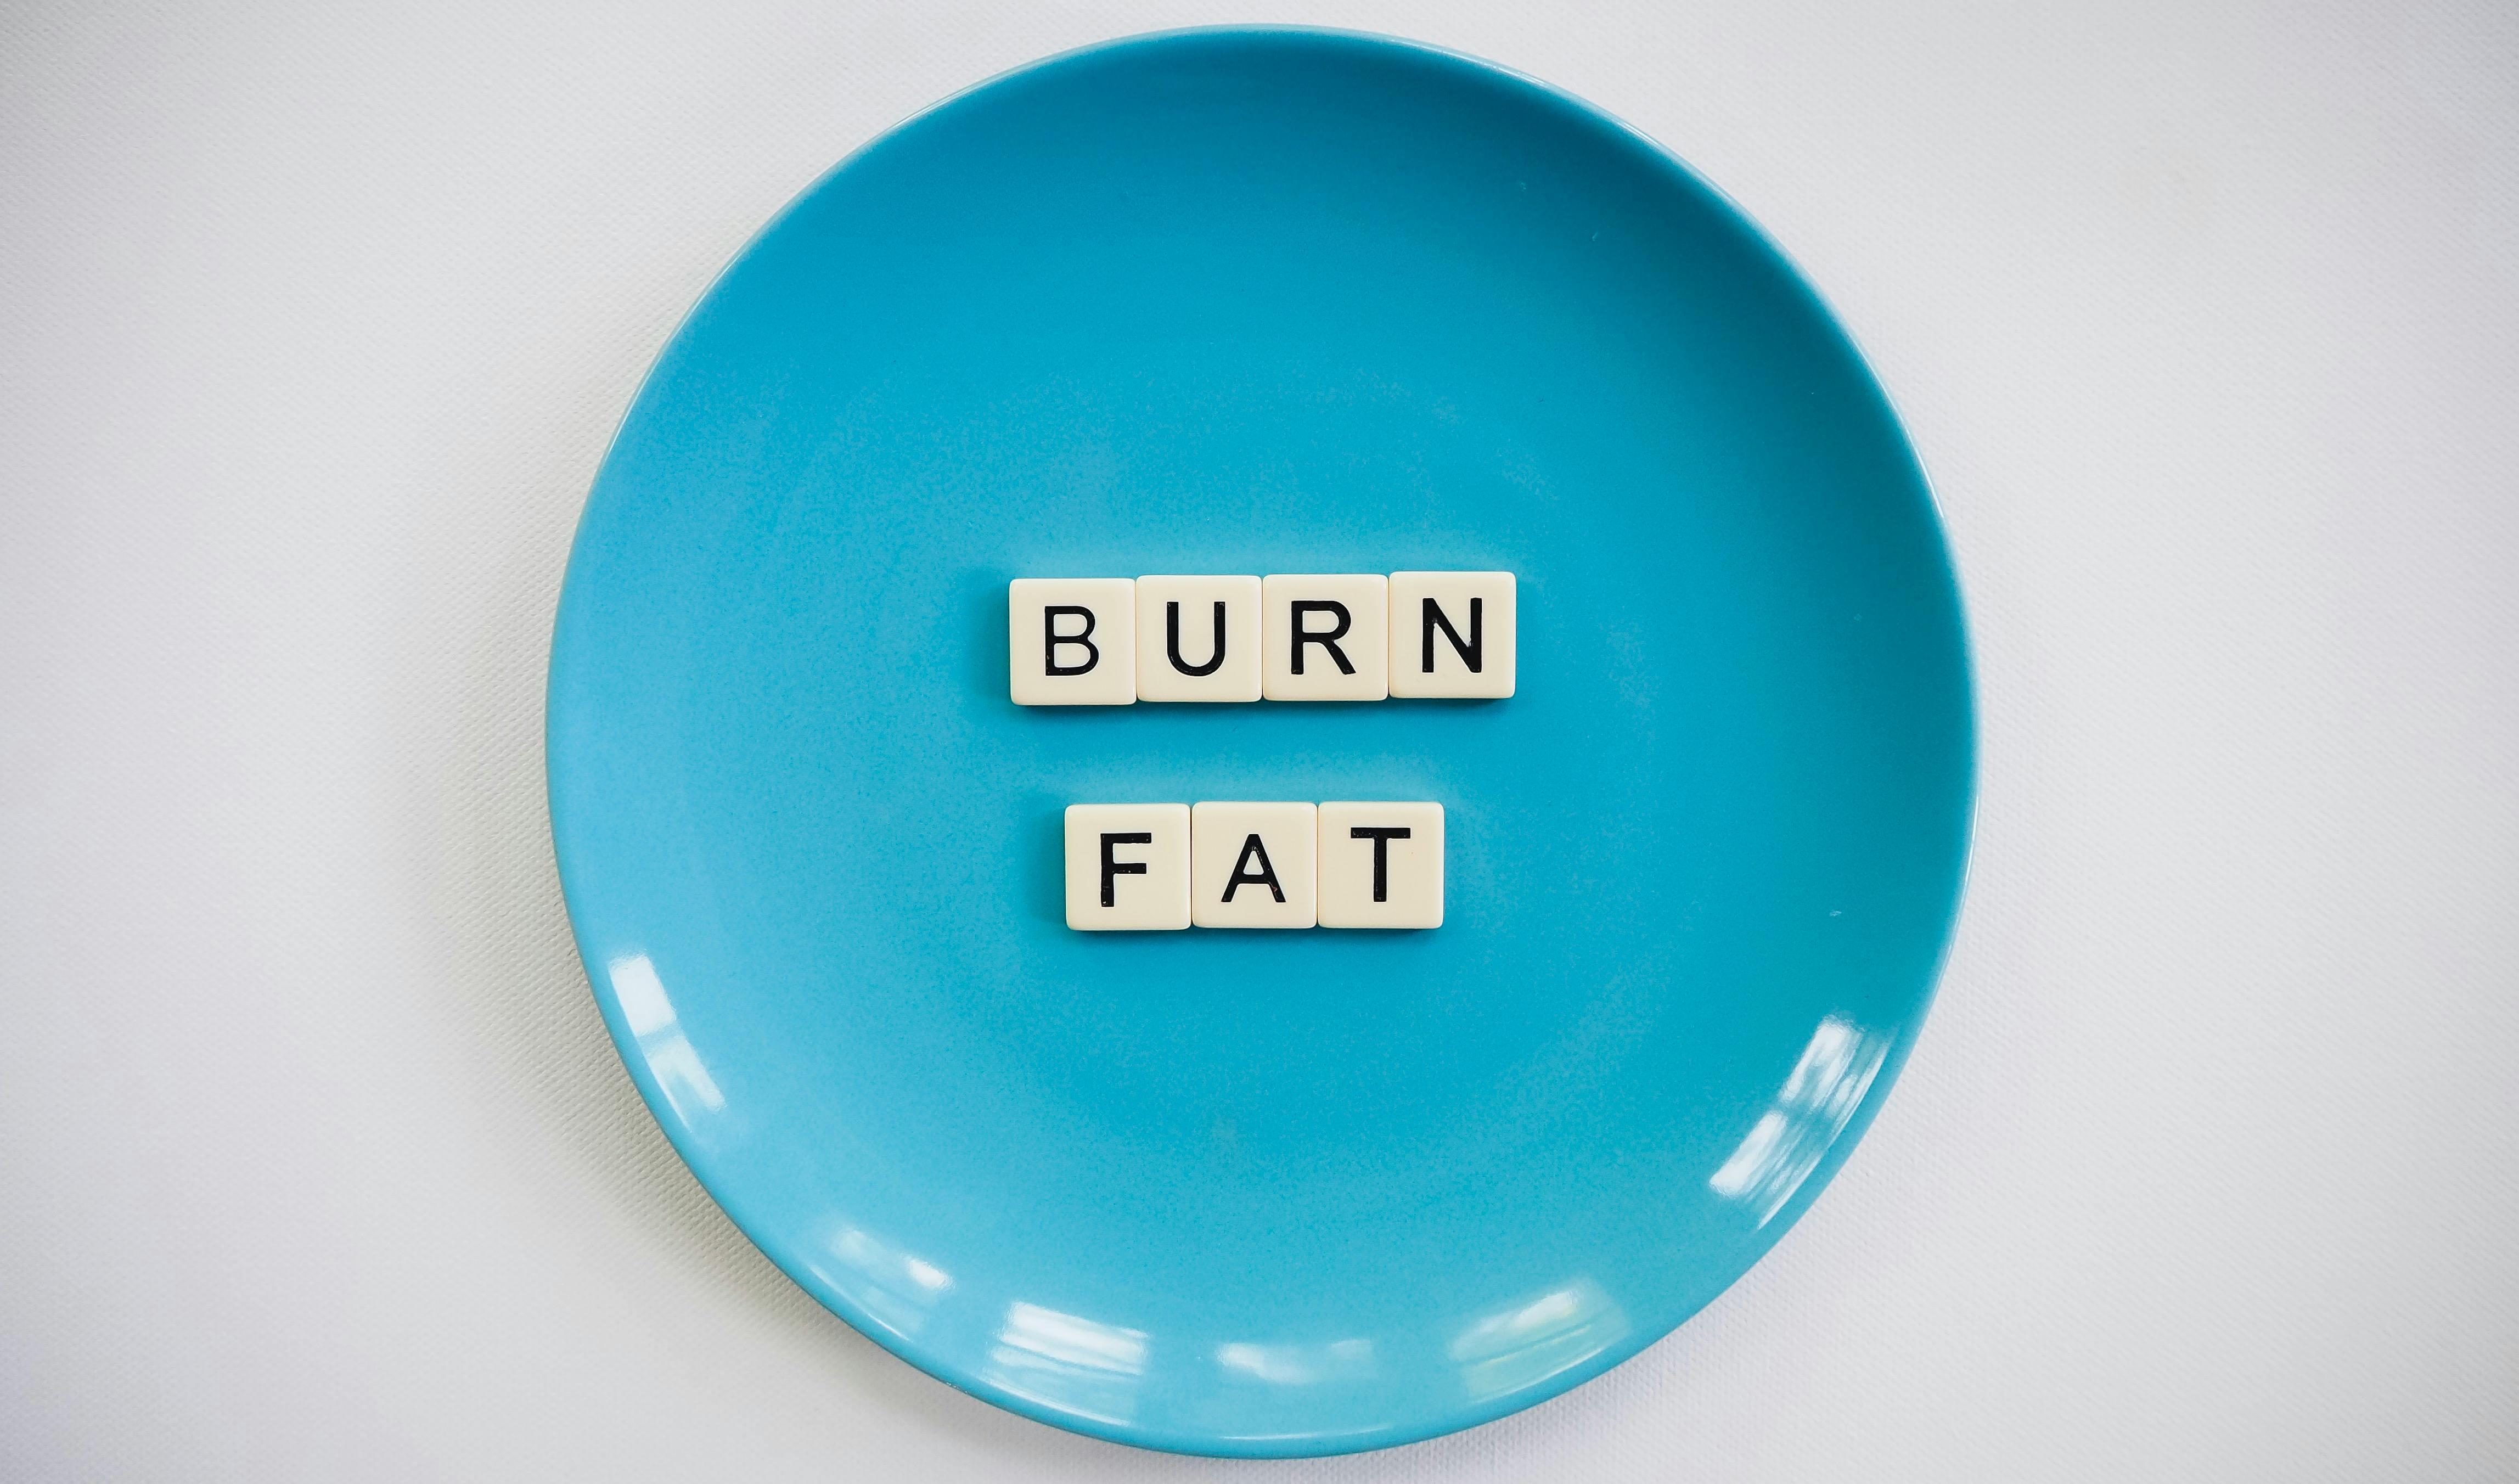 Does water burn fat?